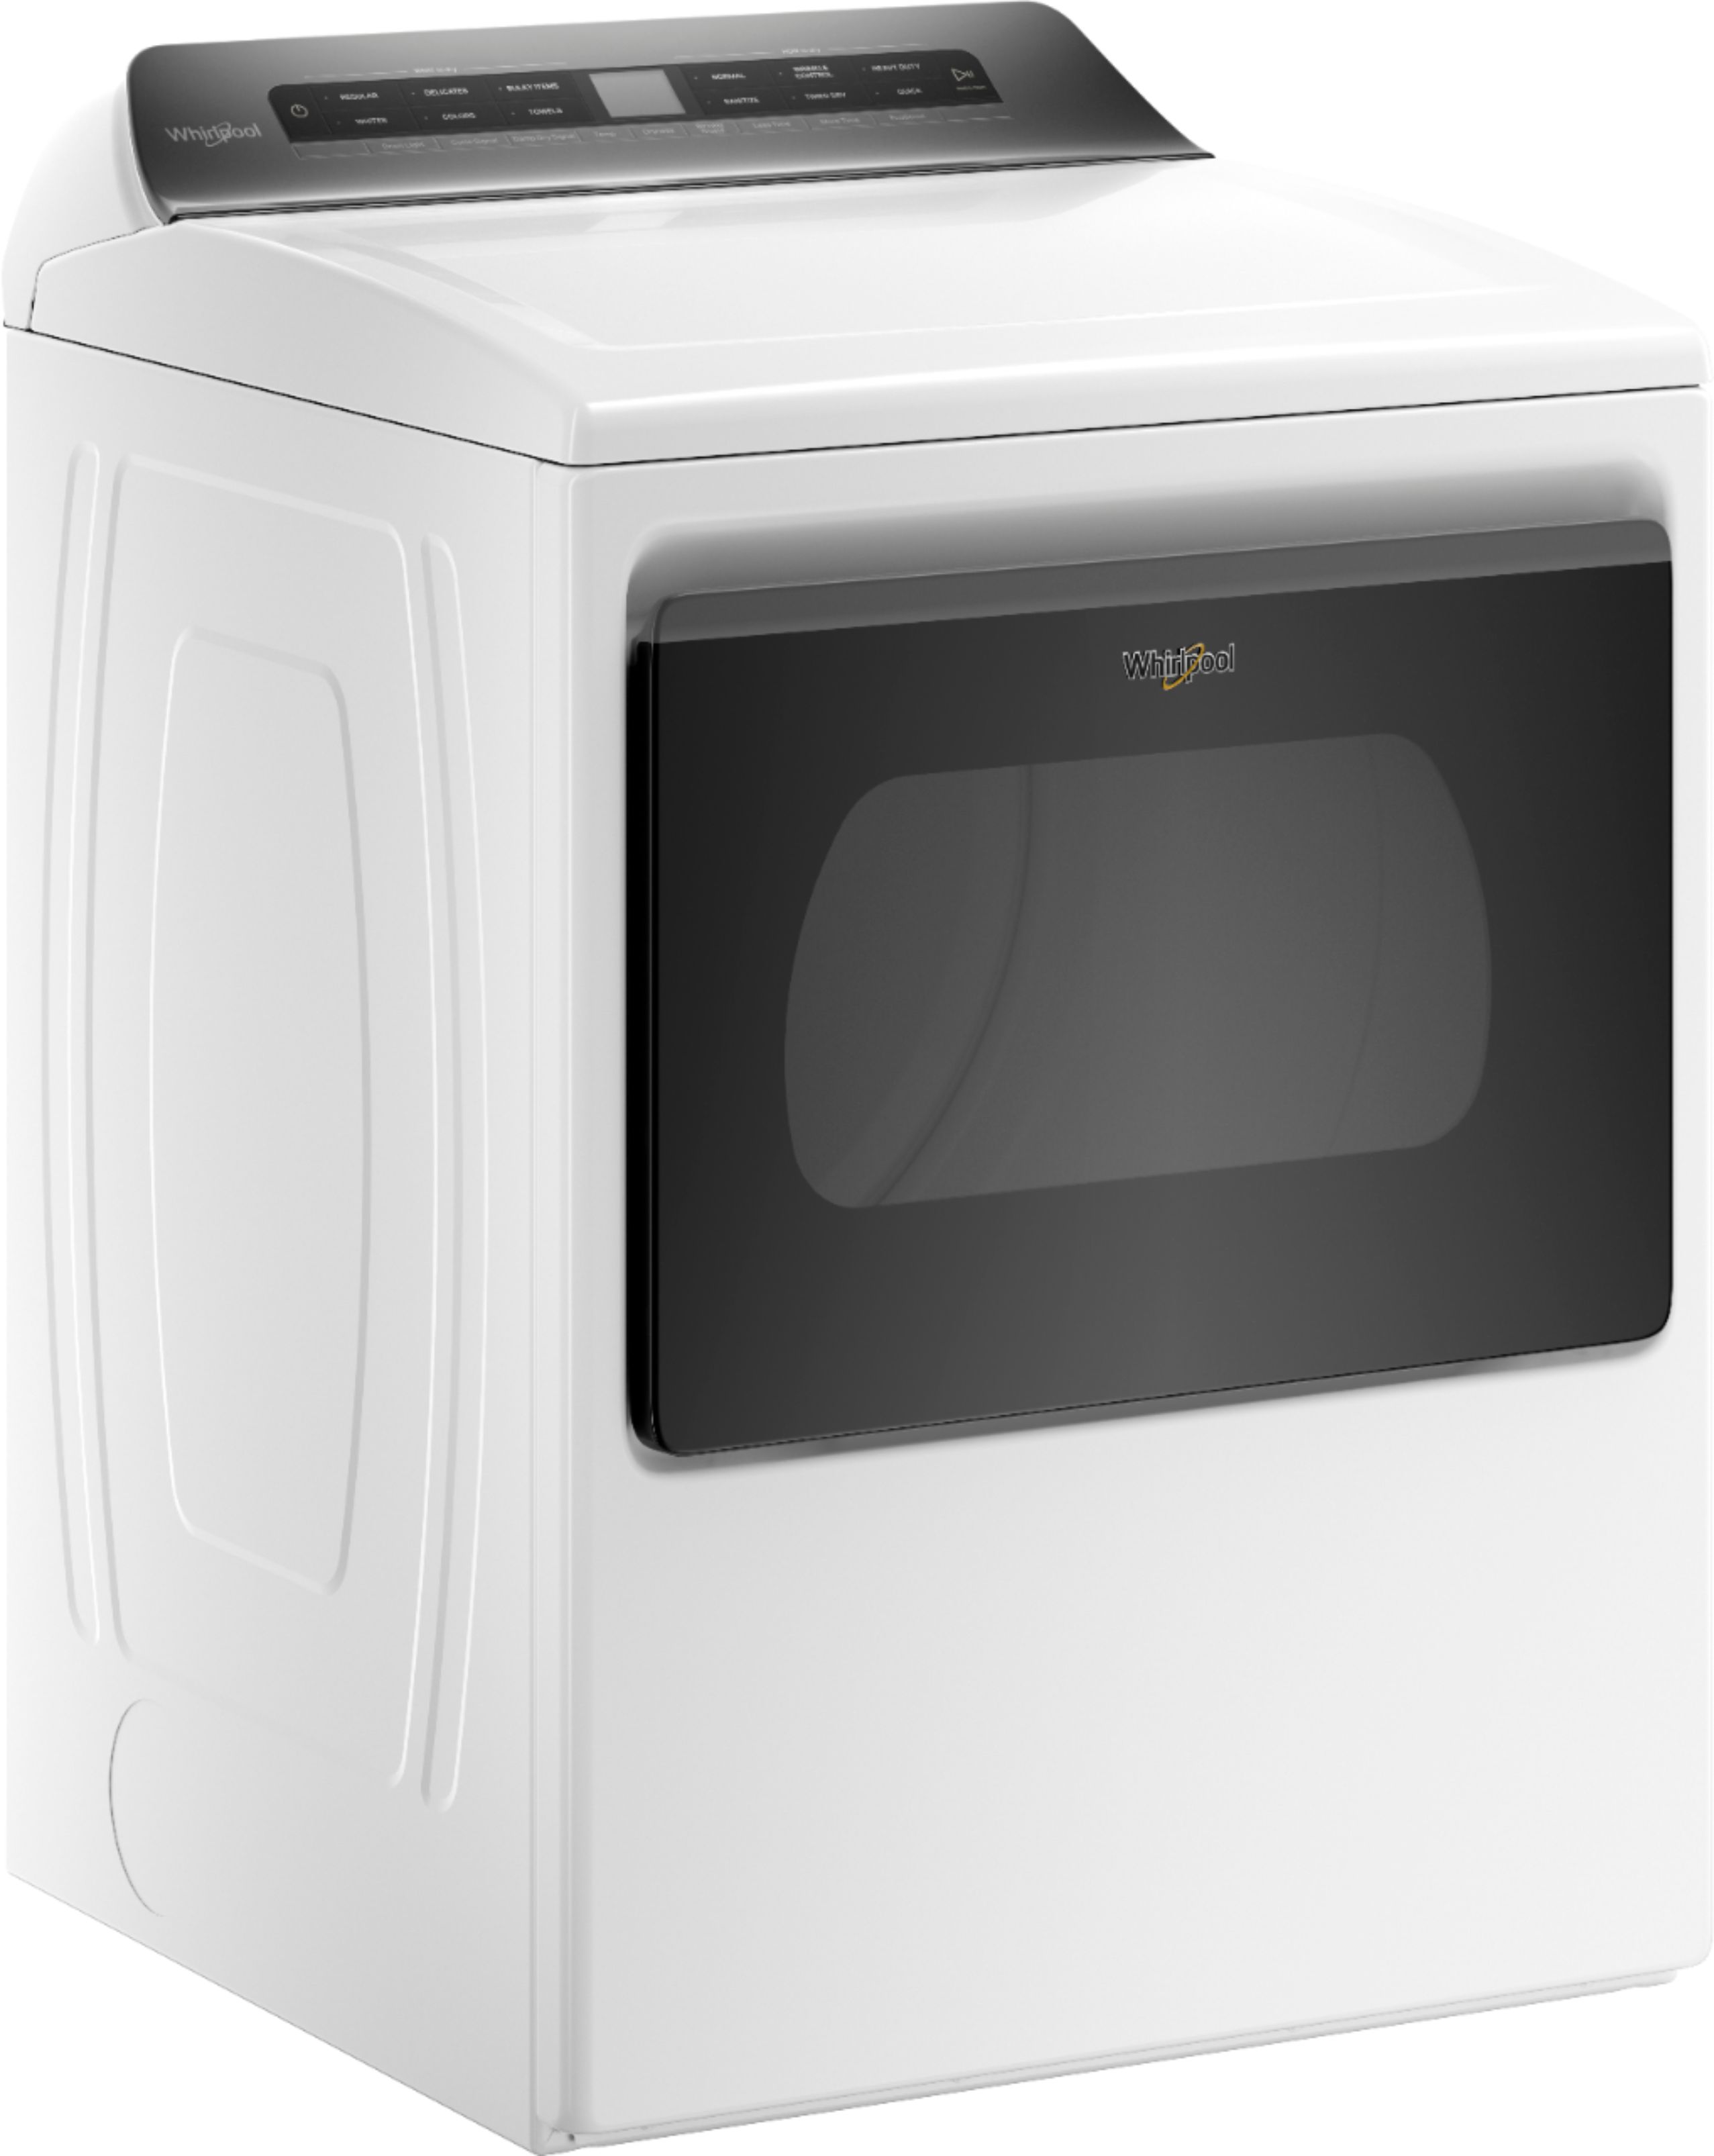 Angle View: Whirlpool - 7.4 Cu. Ft. Stackable Gas Dryer with Wrinkle Shield - Chrome shadow